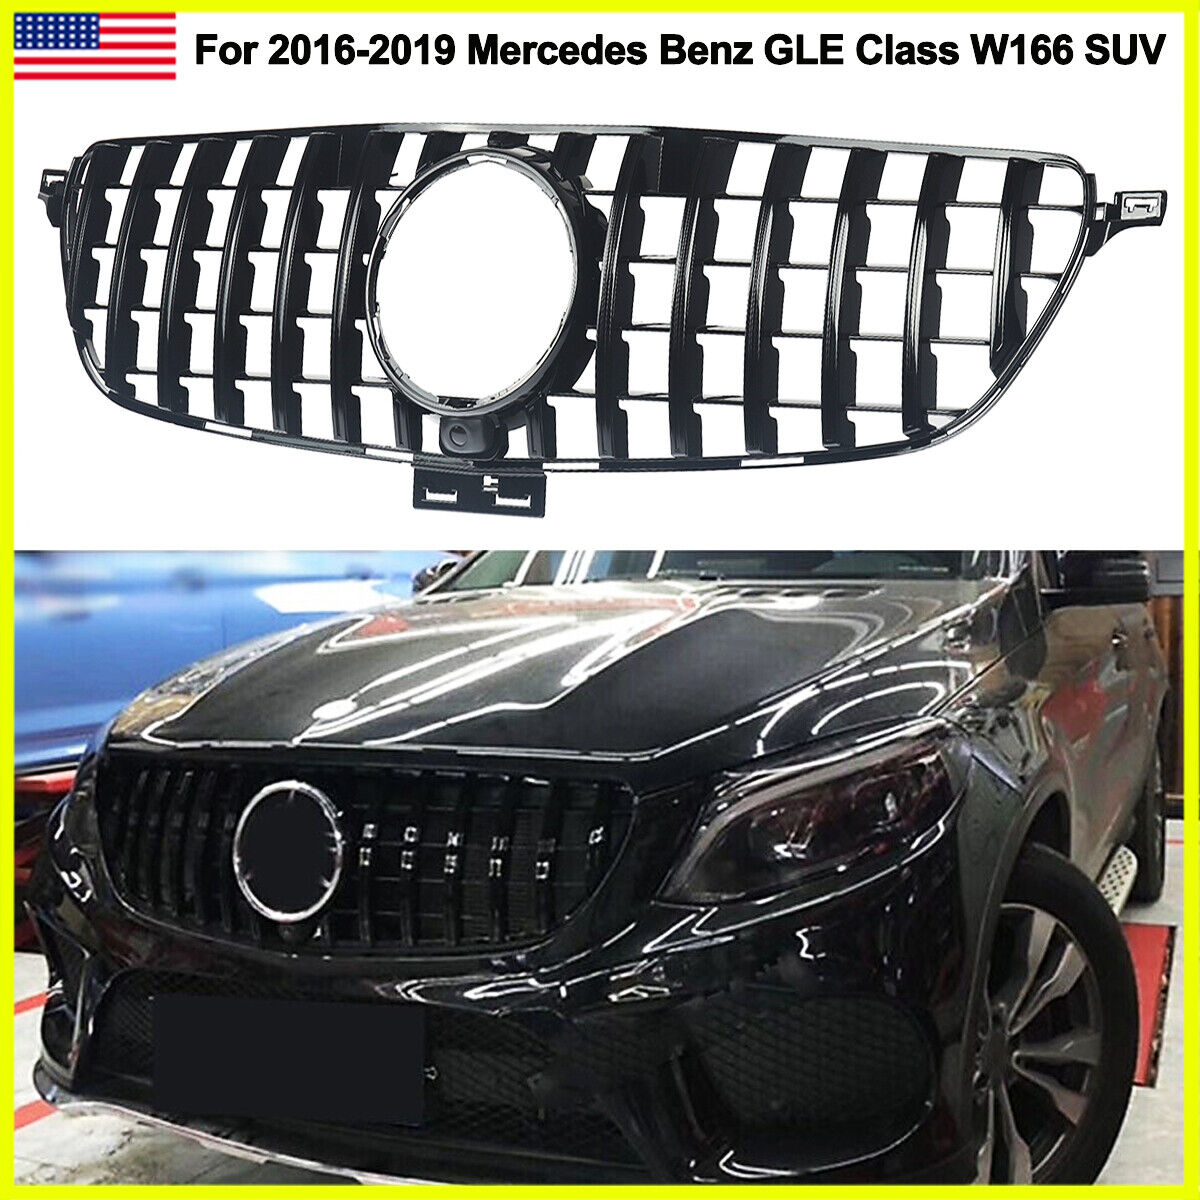 GTR Front Grille All Gloss Black For Benz W166 GLE350 GLE400 GLE43 AMG 2015-2019